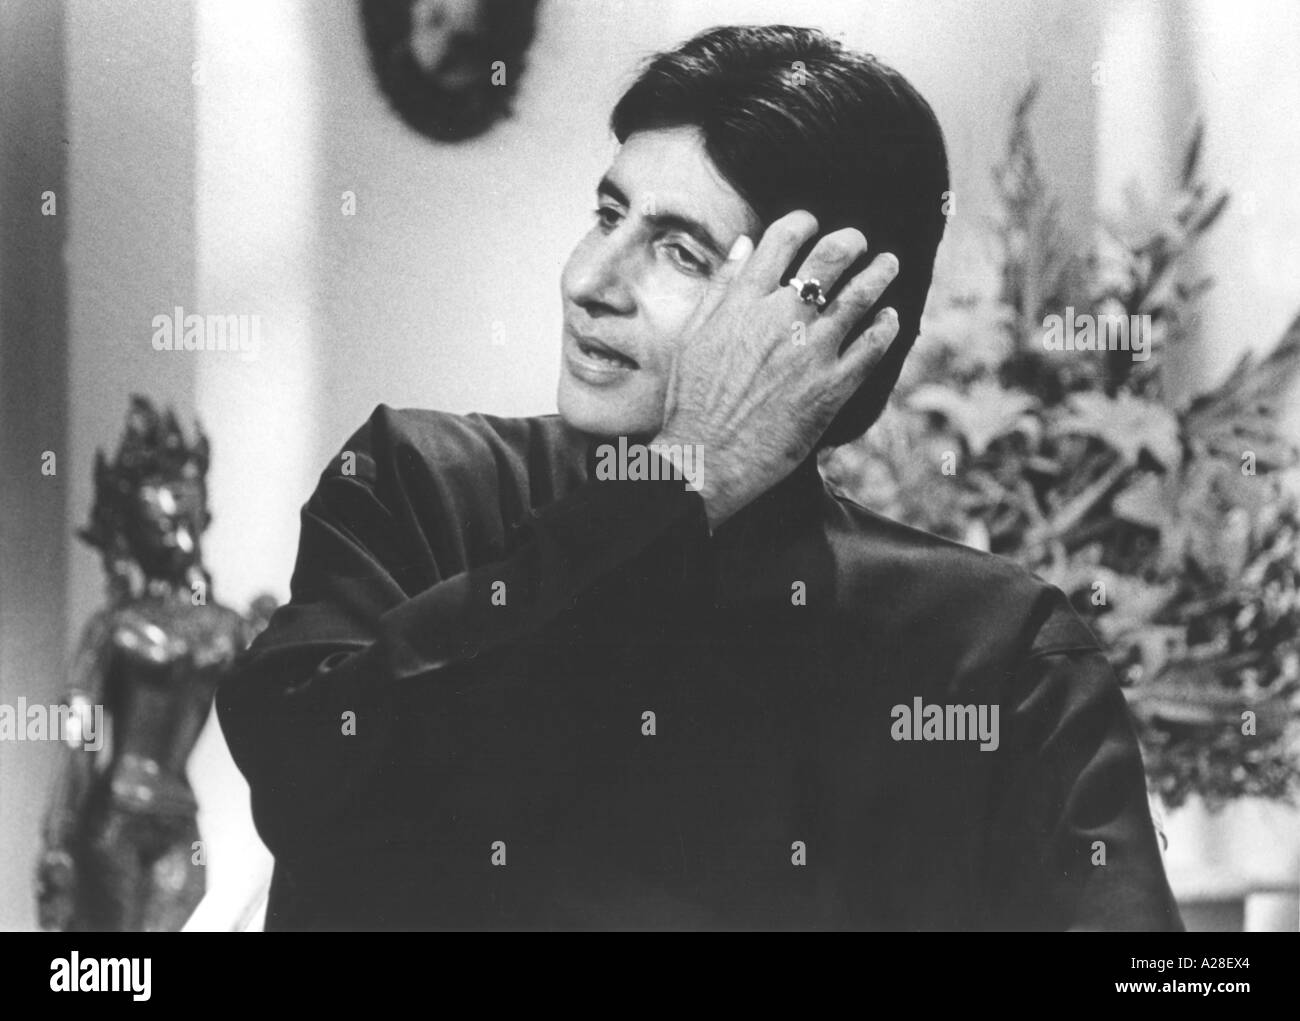 Indian Bollywood Film Star Actor Amitabh Bachchan smiling in a TV interview India Stock Photo